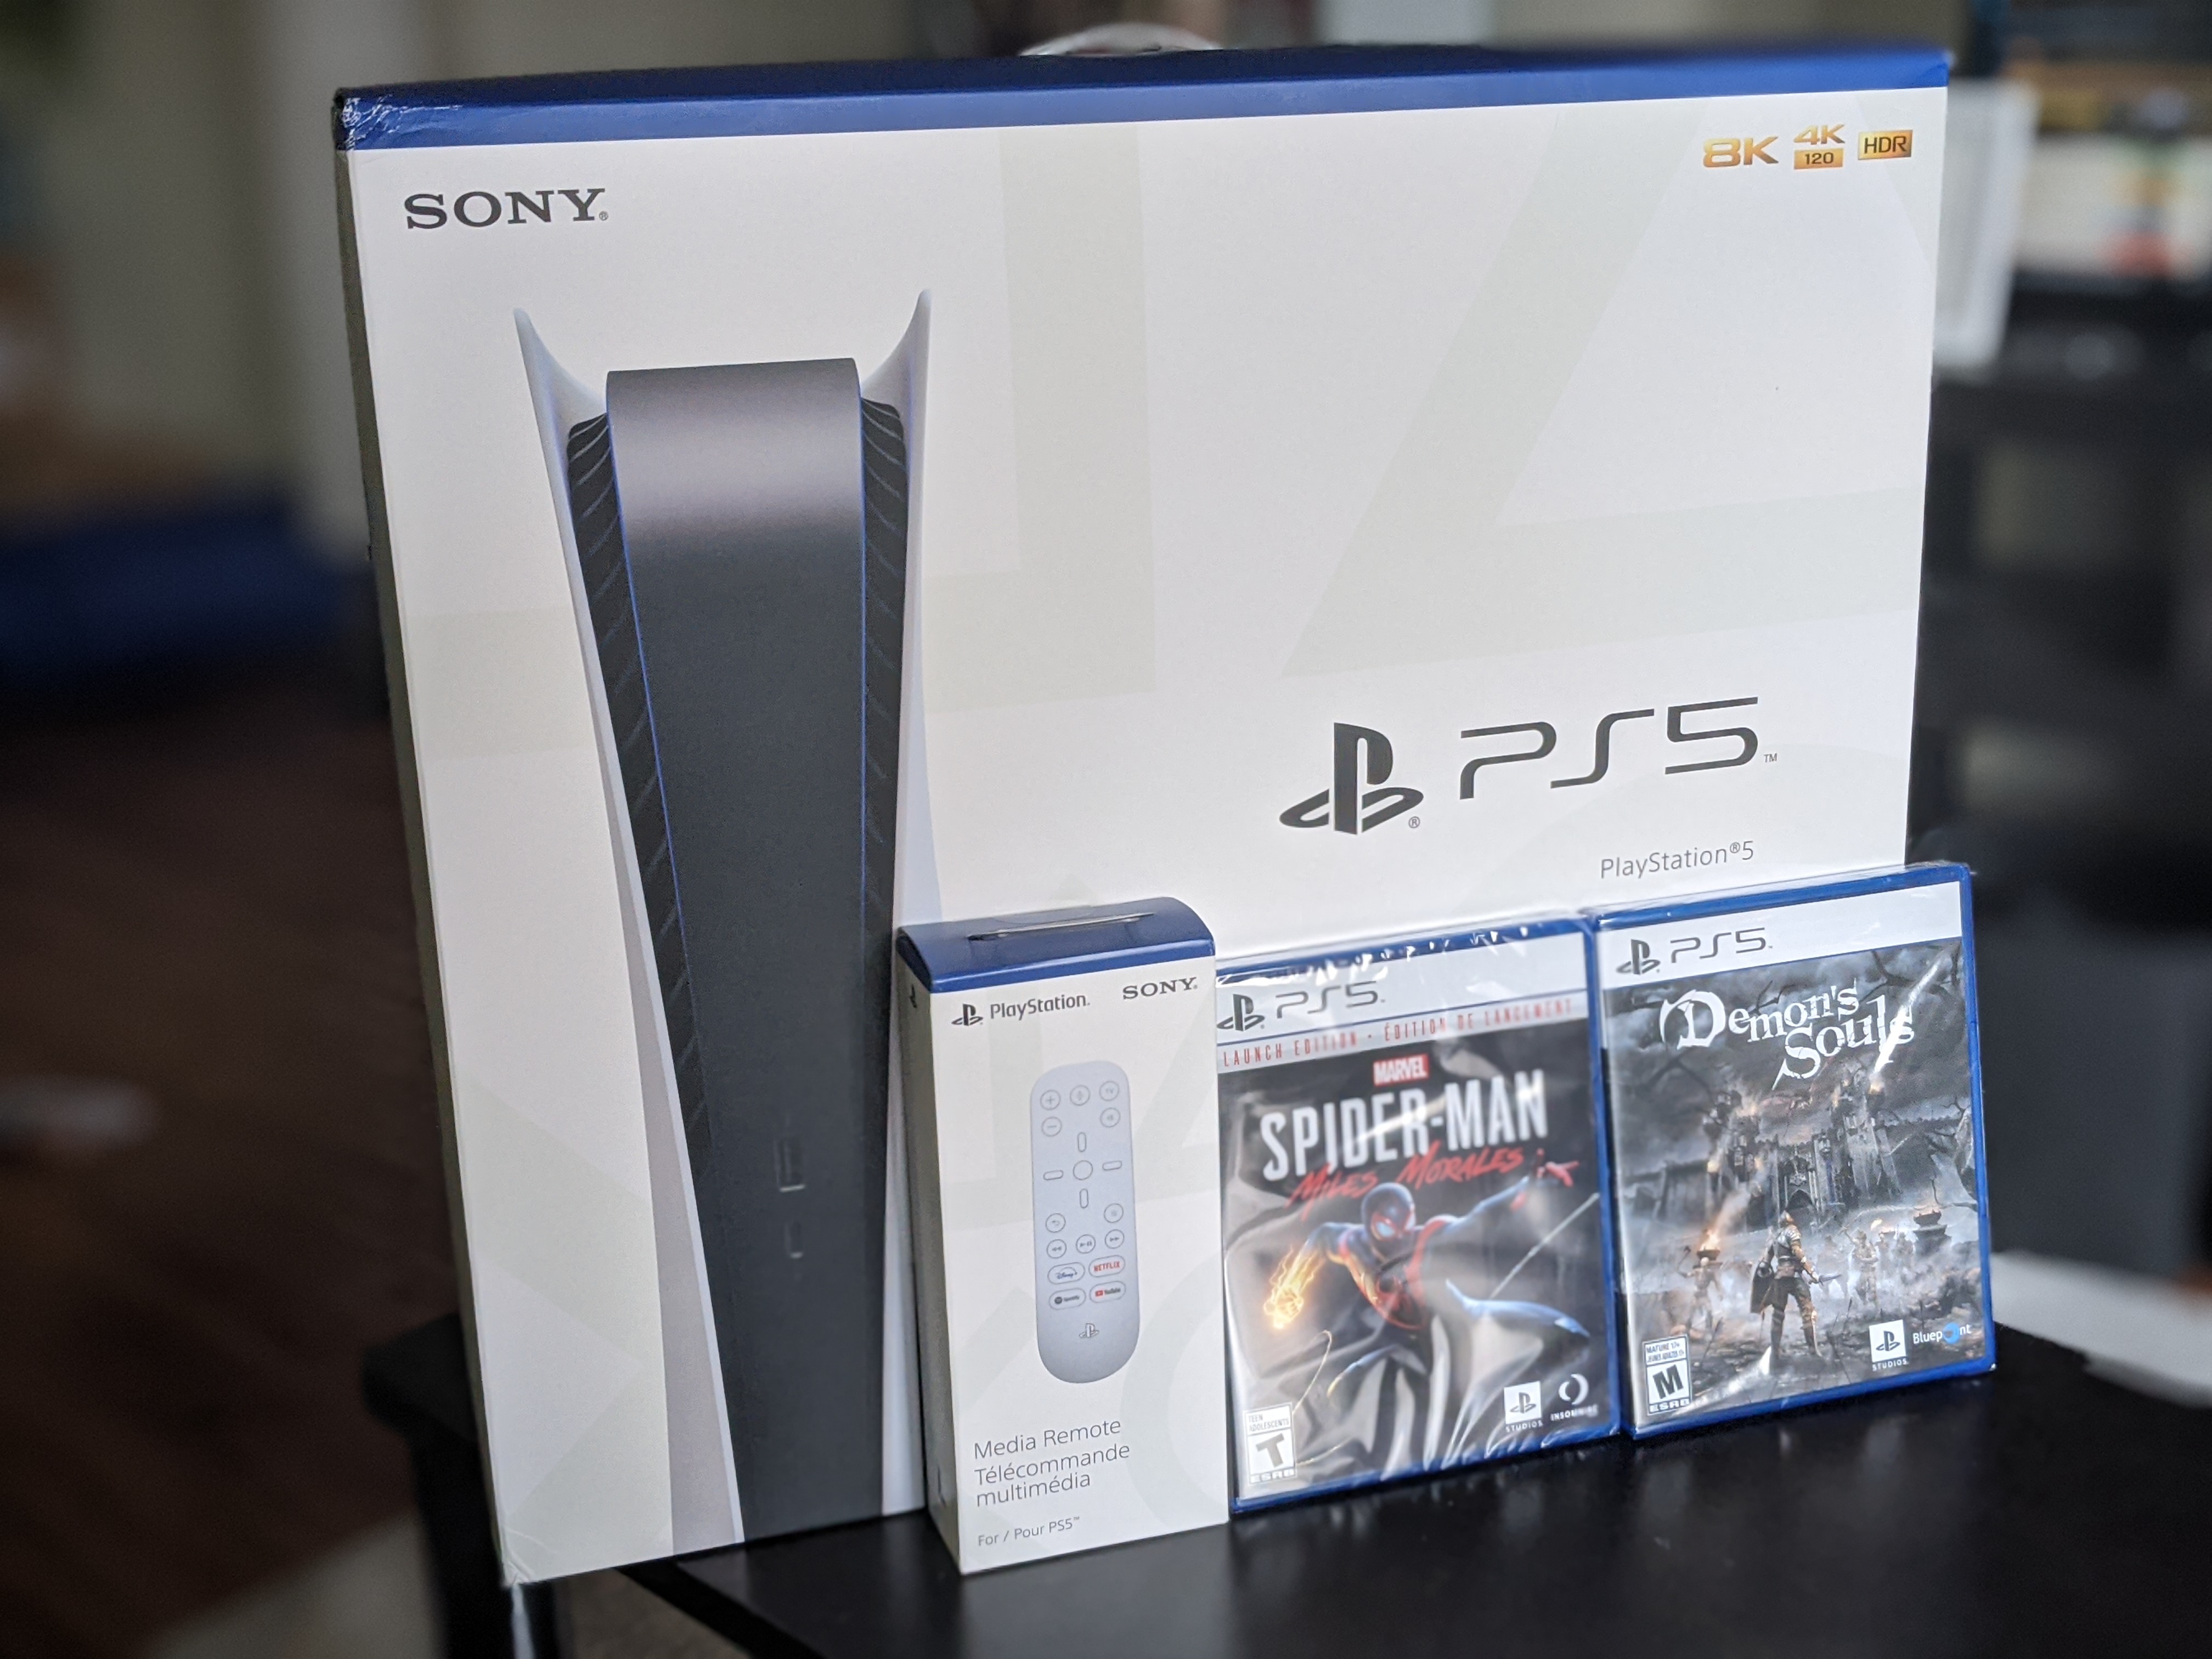 A PS5 box with the Media Remote, Spider-man Miles Morales, and Demon's Souls positioned in front of it.